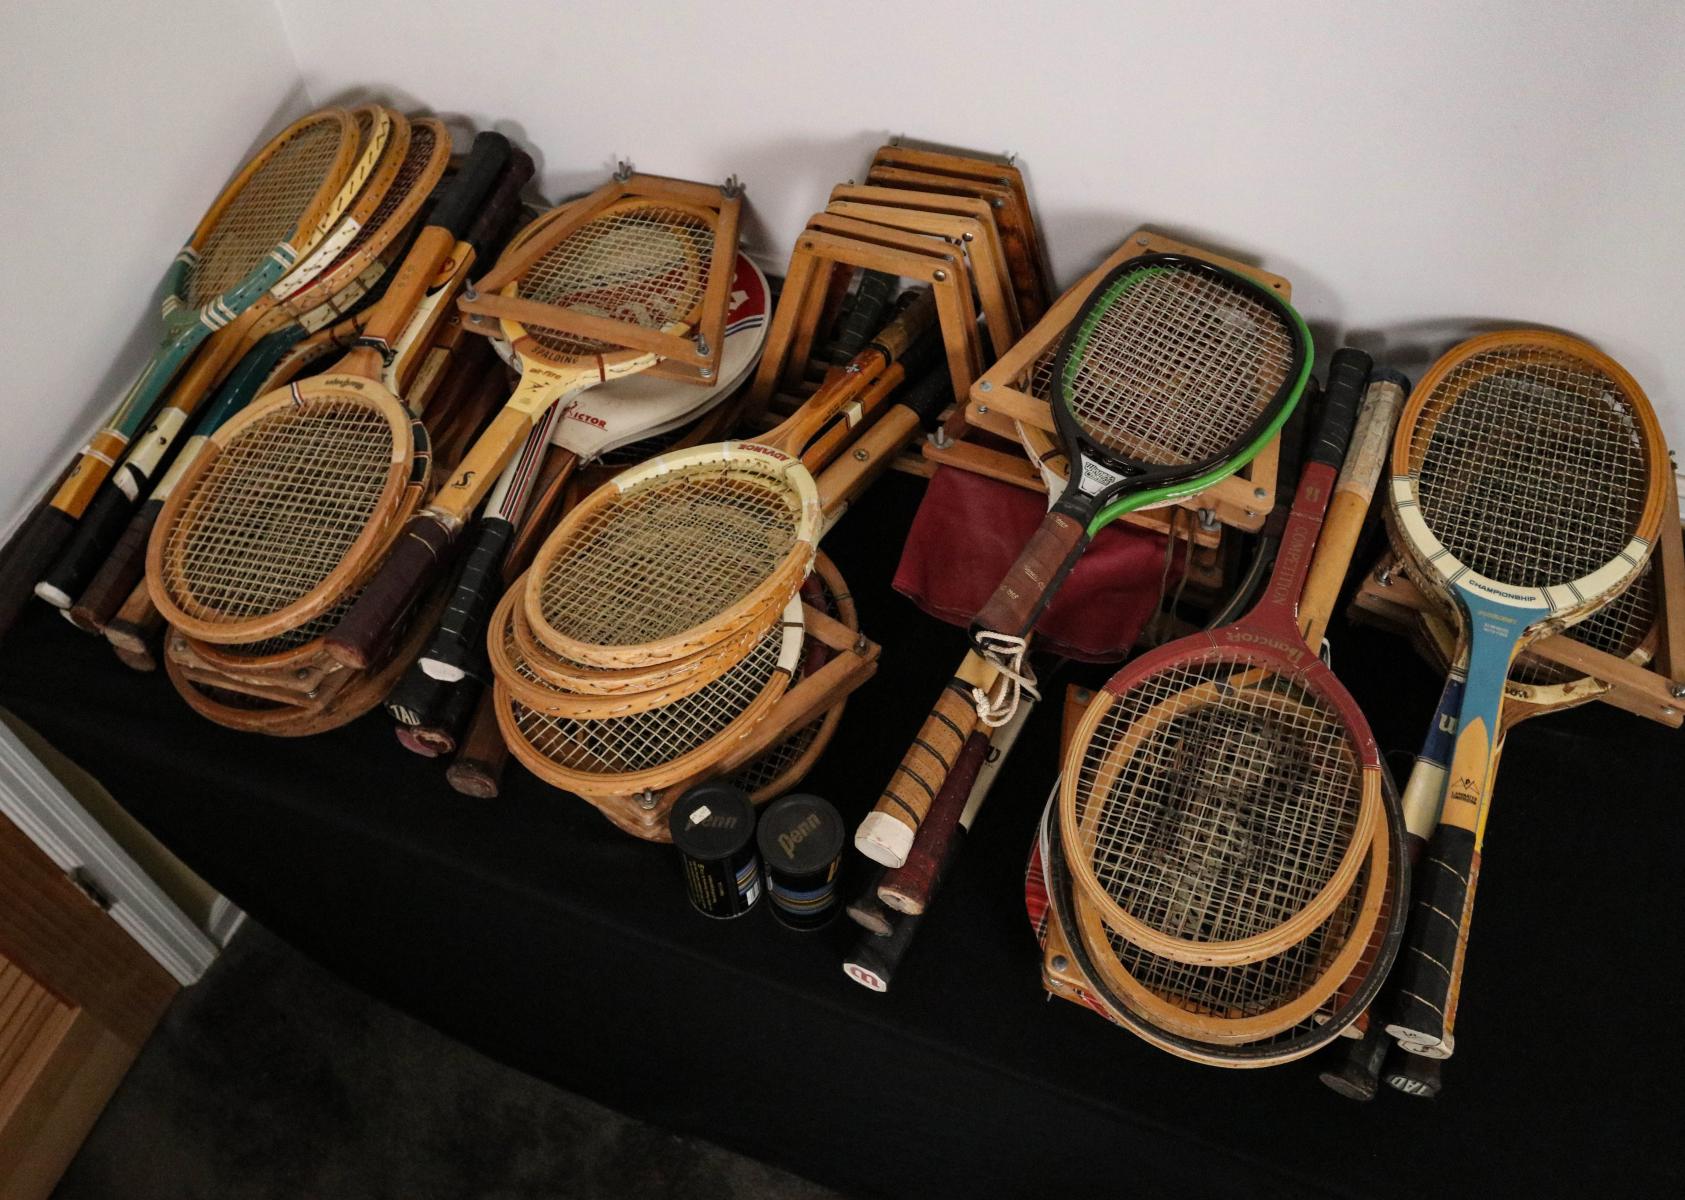 A LARGE COLLECTION OF TENNIS RACKETS